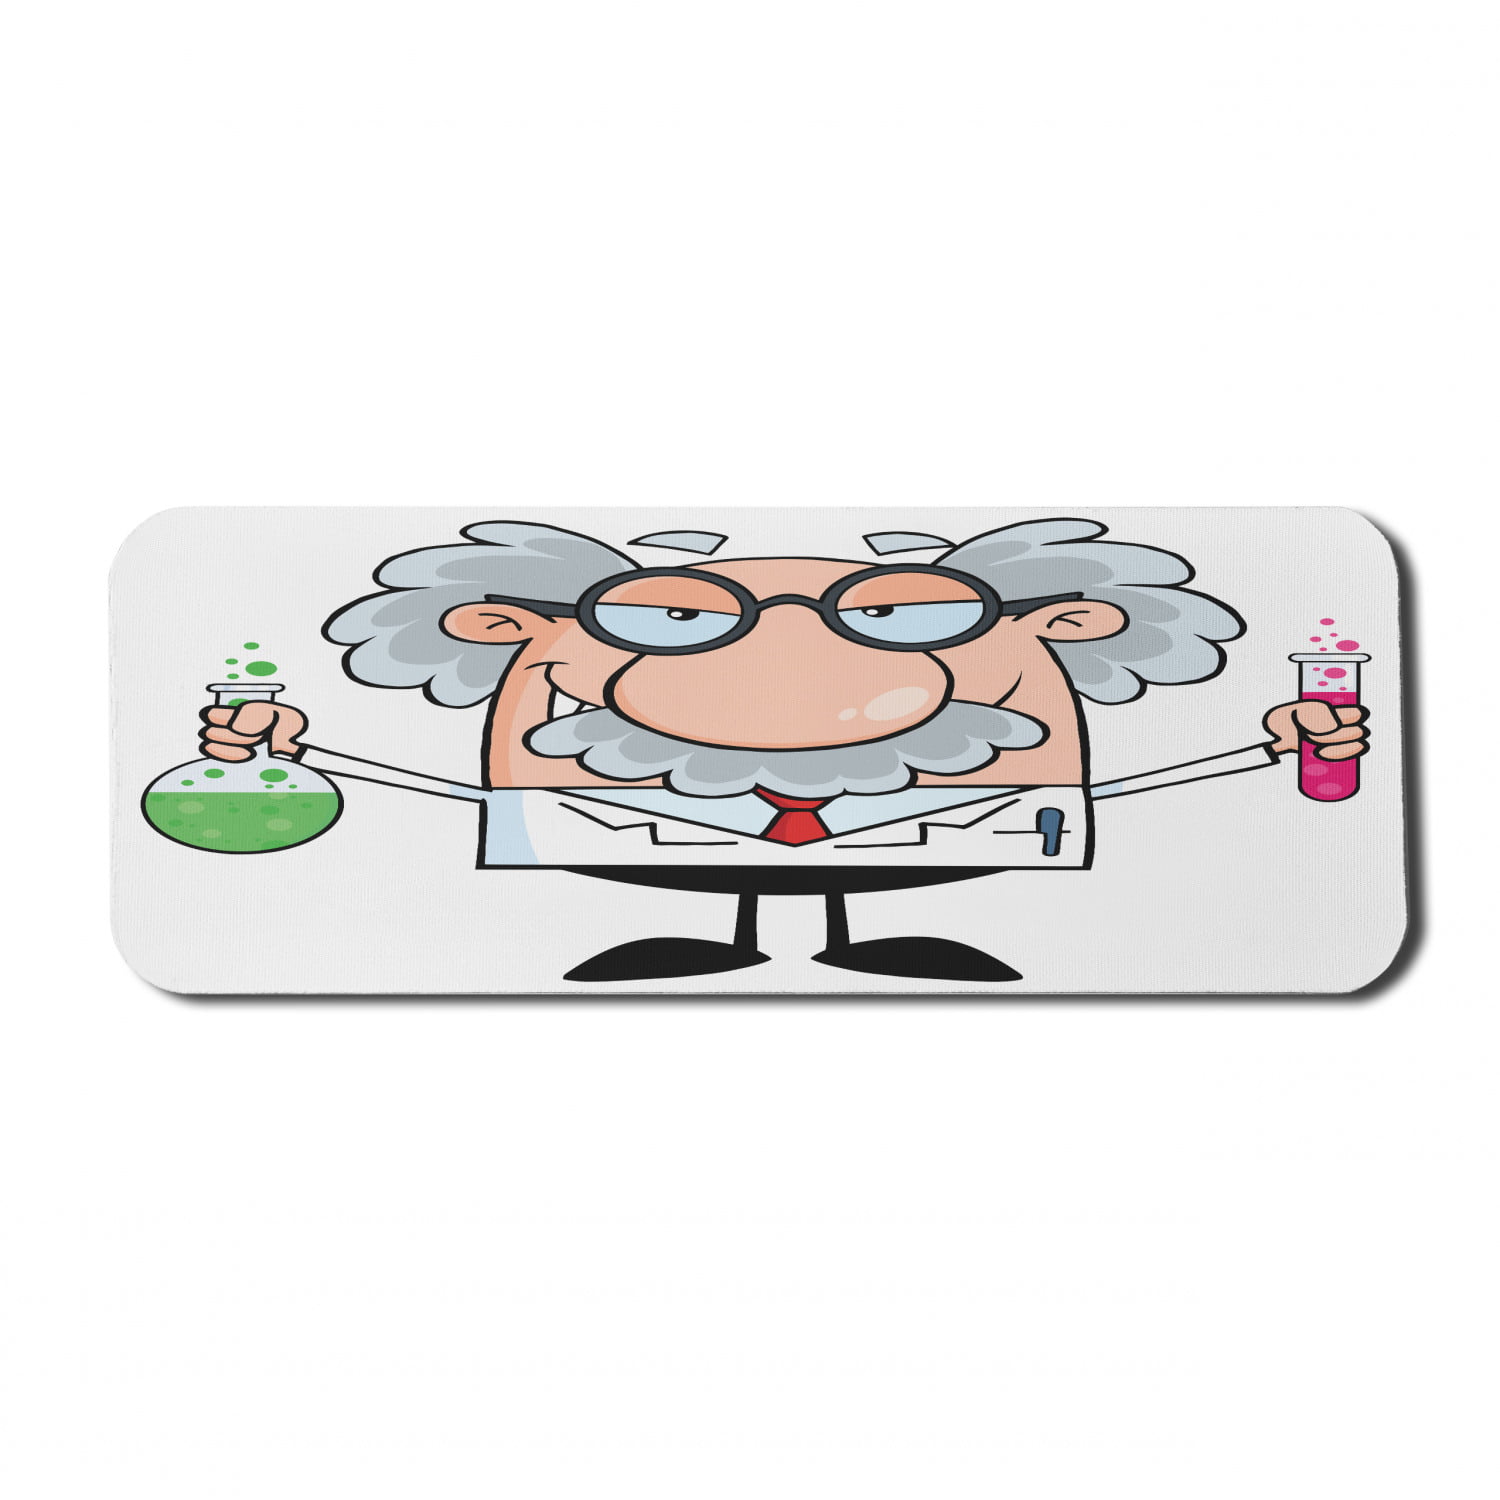 Cartoon Computer Mouse Pad, Nursery Science Themed Composition with Old  Scientist with Glasses and Mustache, Rectangle Non-Slip Rubber Mousepad  Large, 31